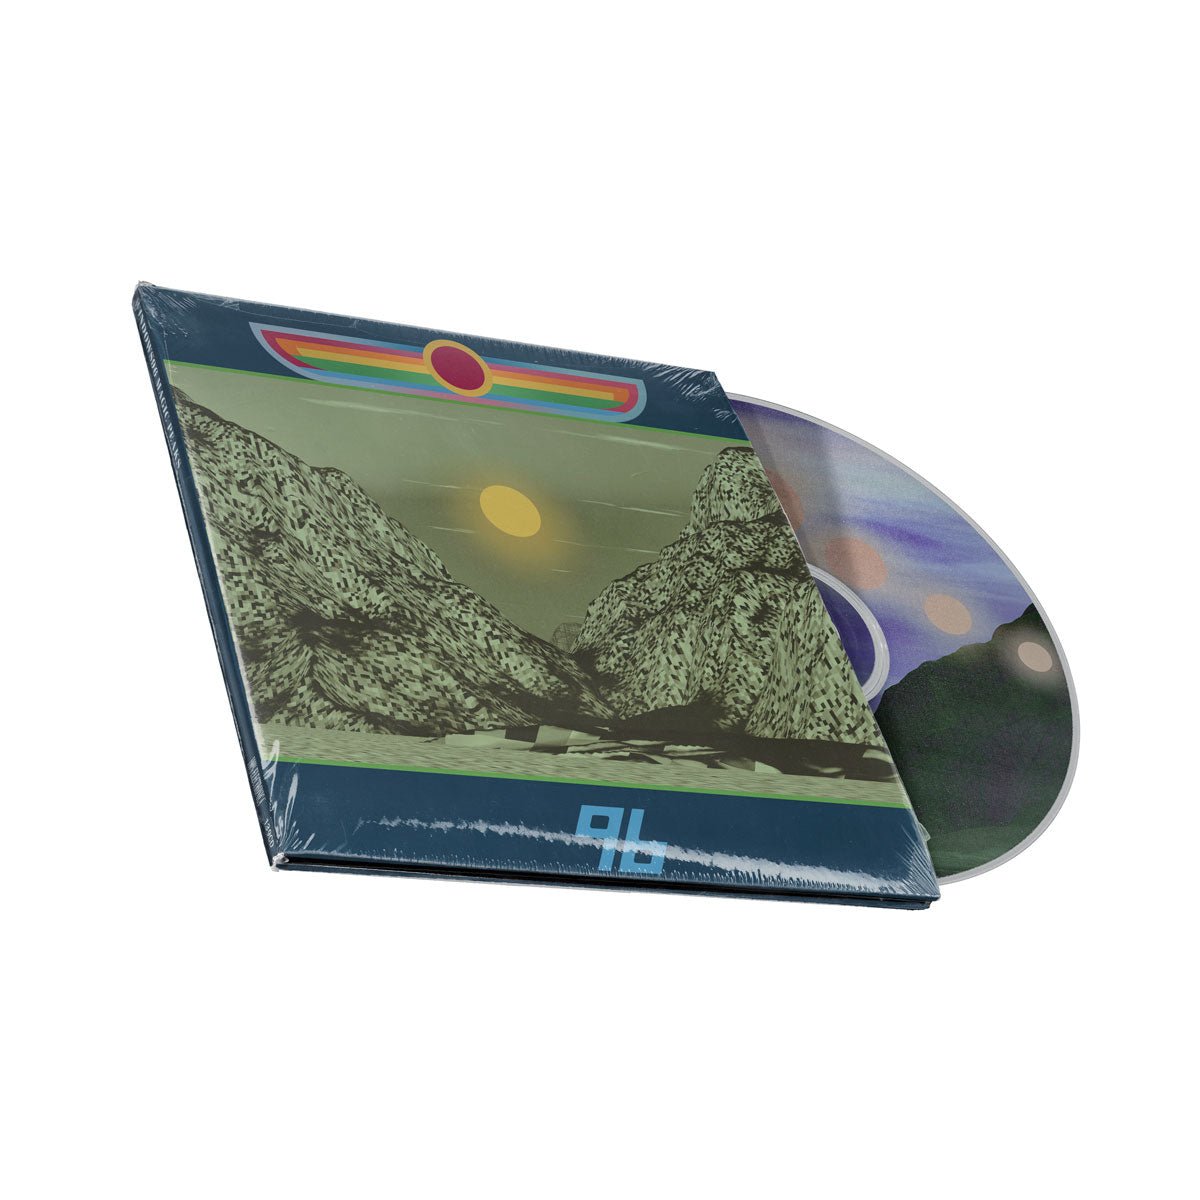 Windows 96 - Magic Peaks CD - 100% Electronica Official Store (Photo 1)